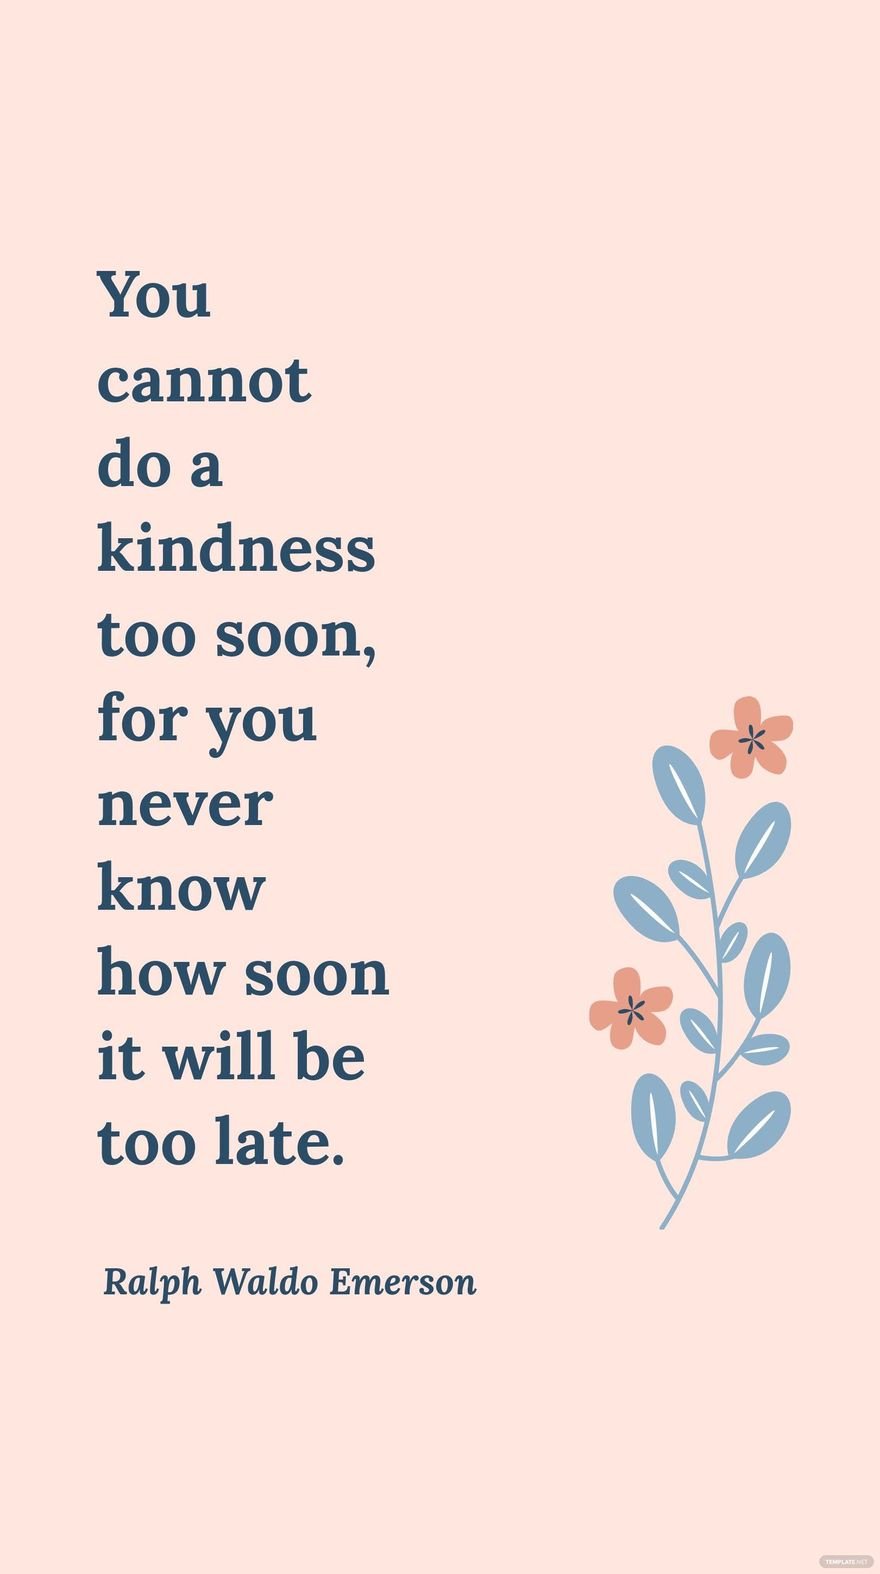 Ralph Waldo Emerson - You cannot do a kindness too soon, for you never know how soon it will be too late.